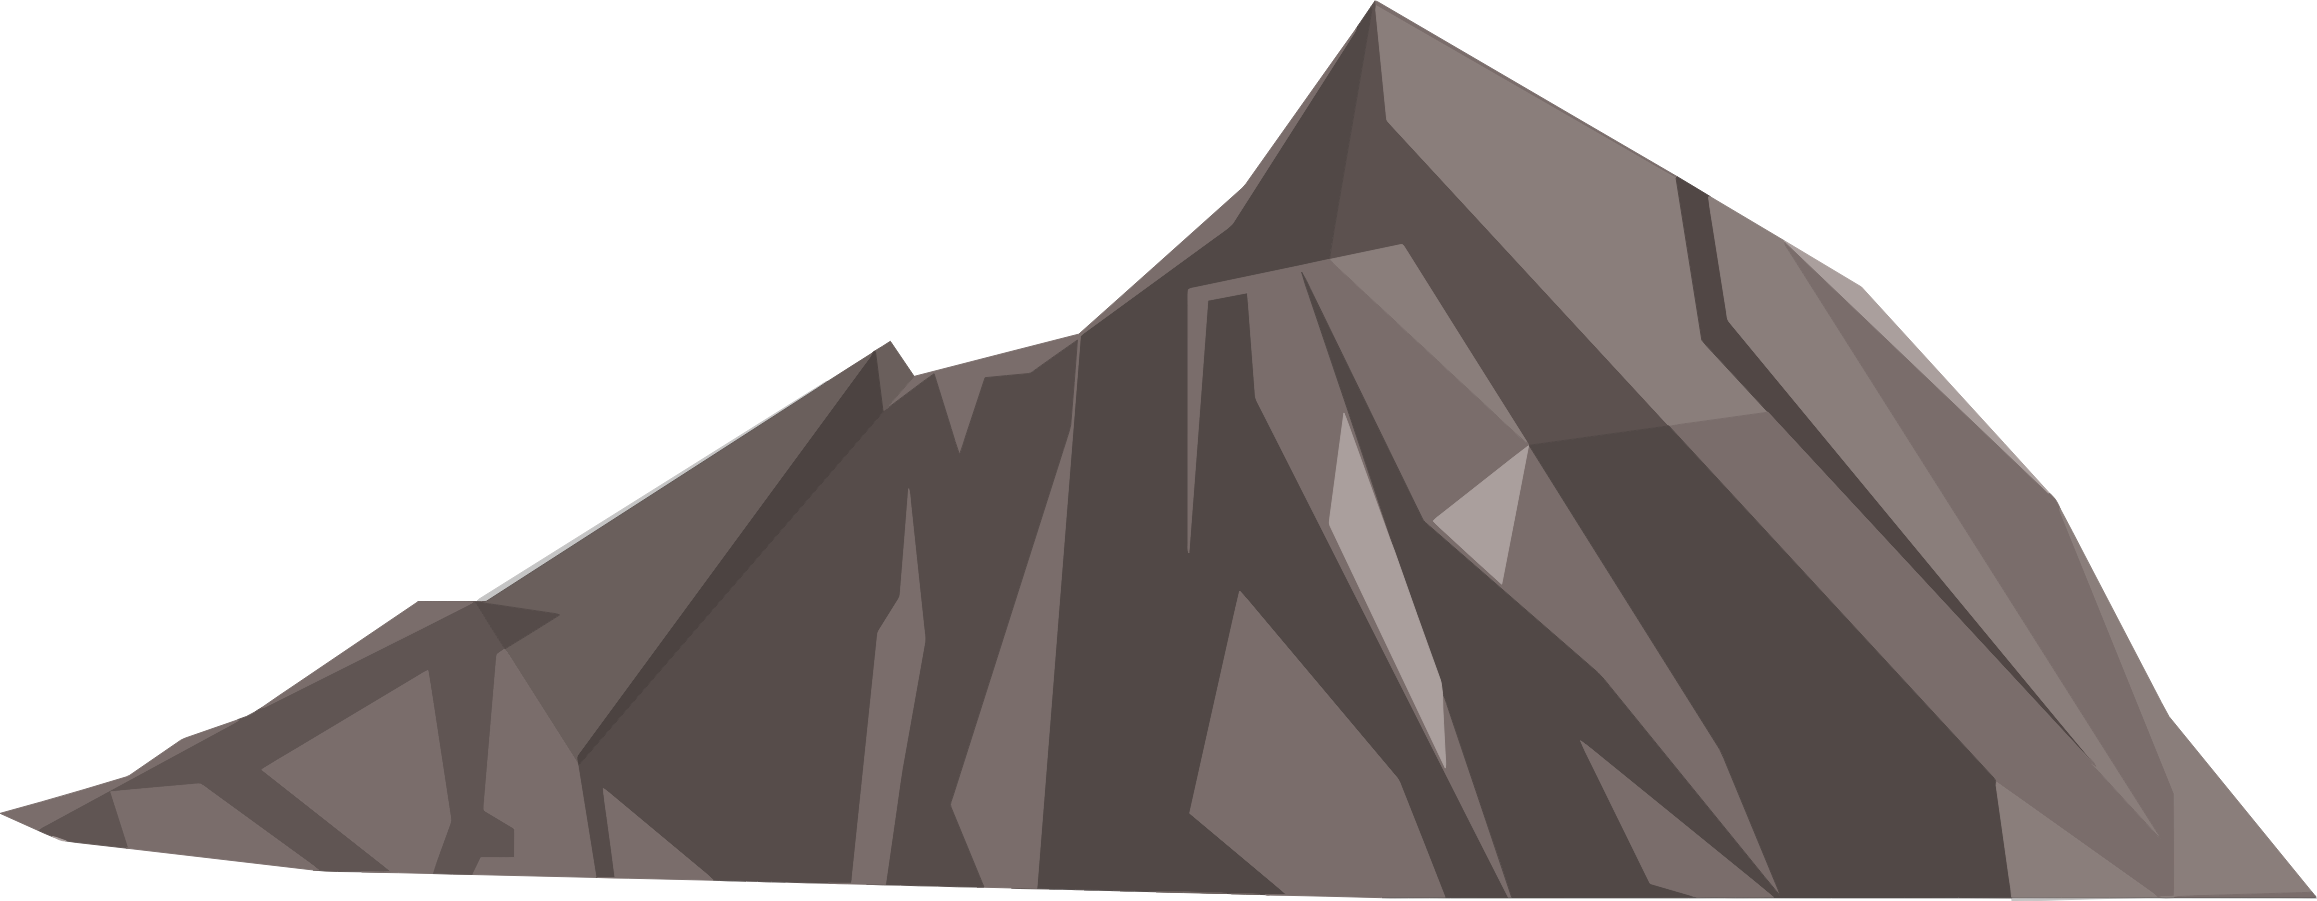 Mountain png clipart.